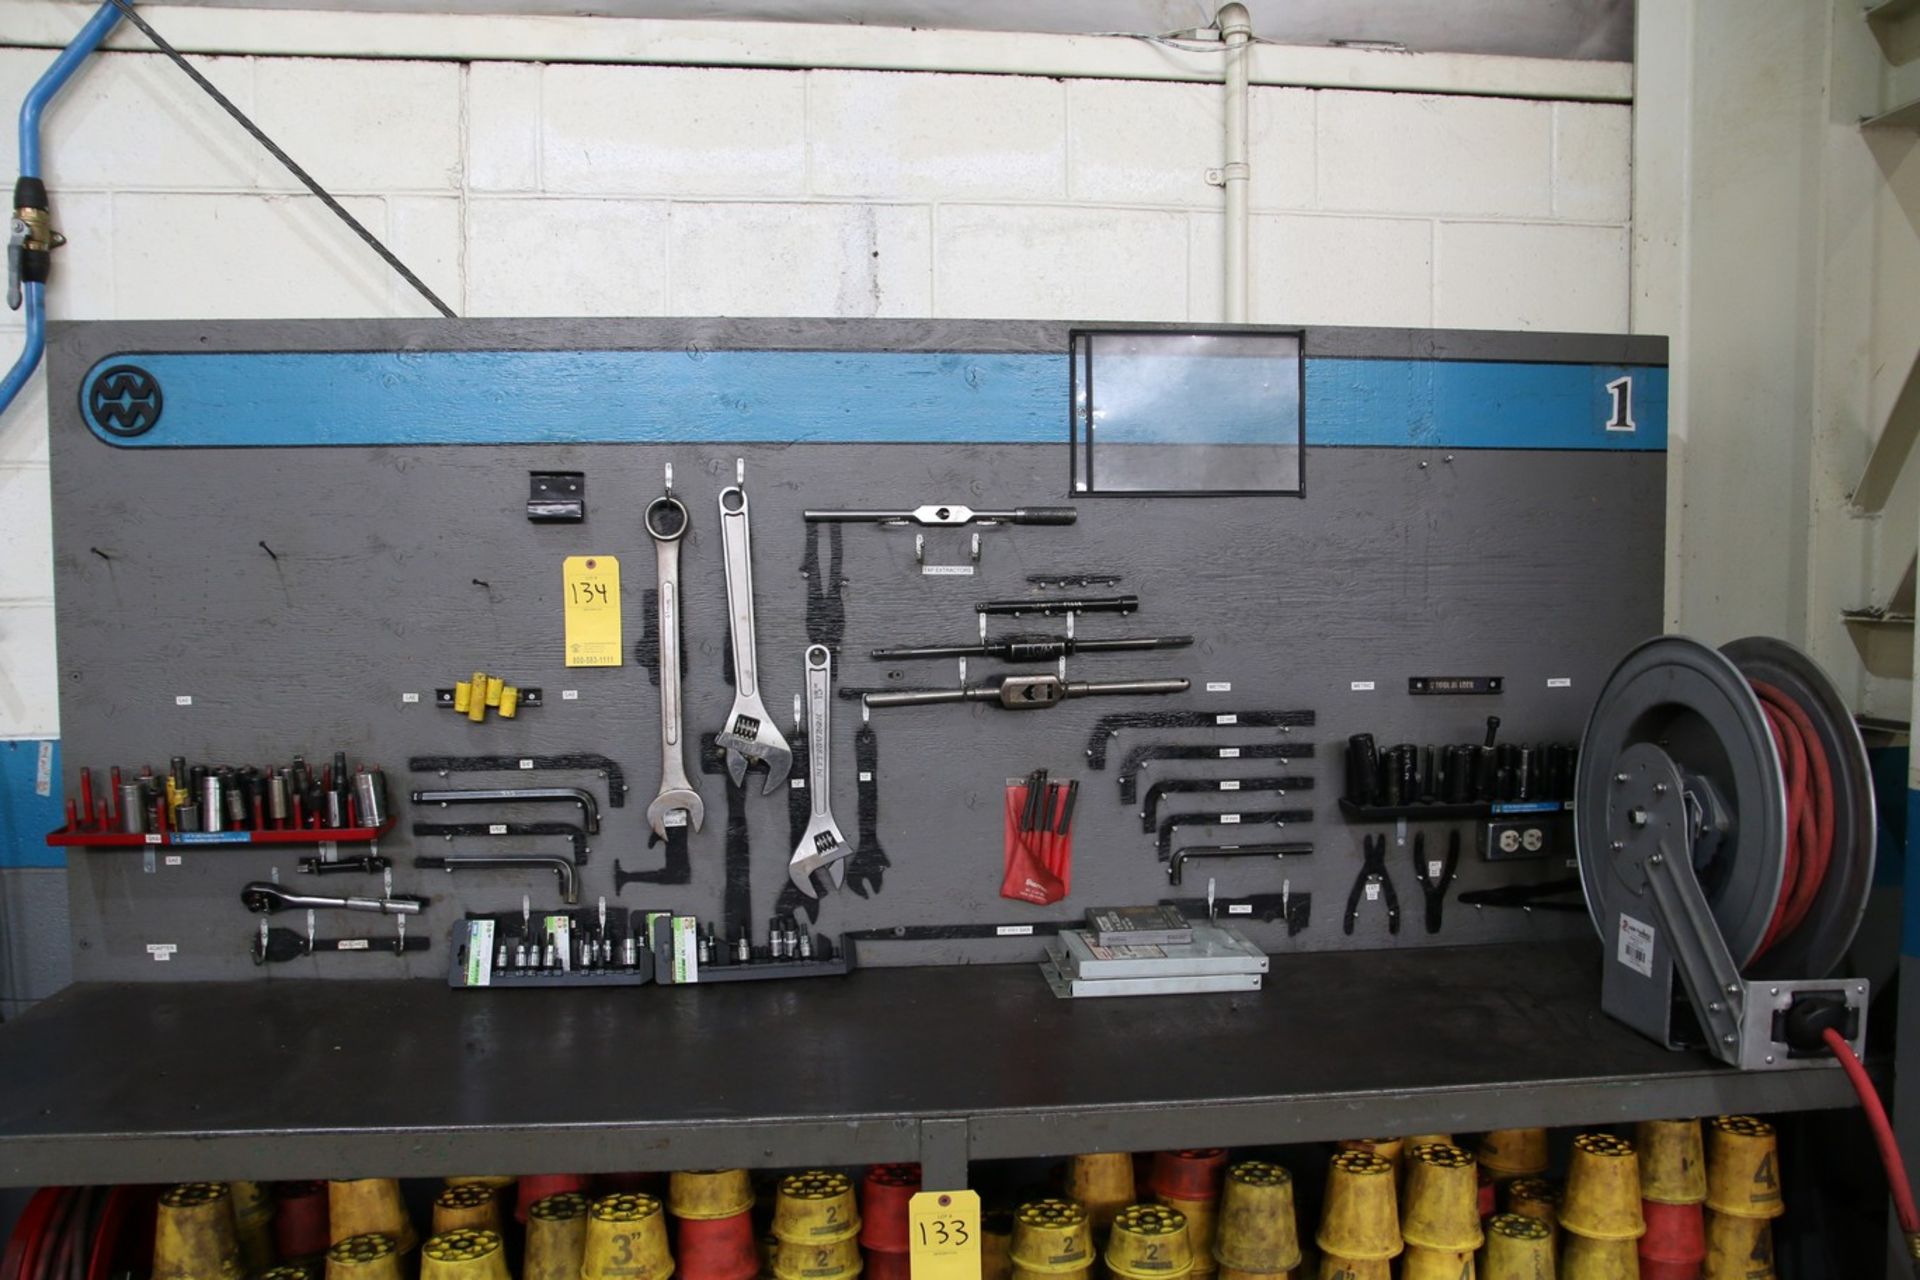 Steel Work Bench with Various Tools 96" x 24" x 40" H, Bench and Tools Only, Doesn't Include Items